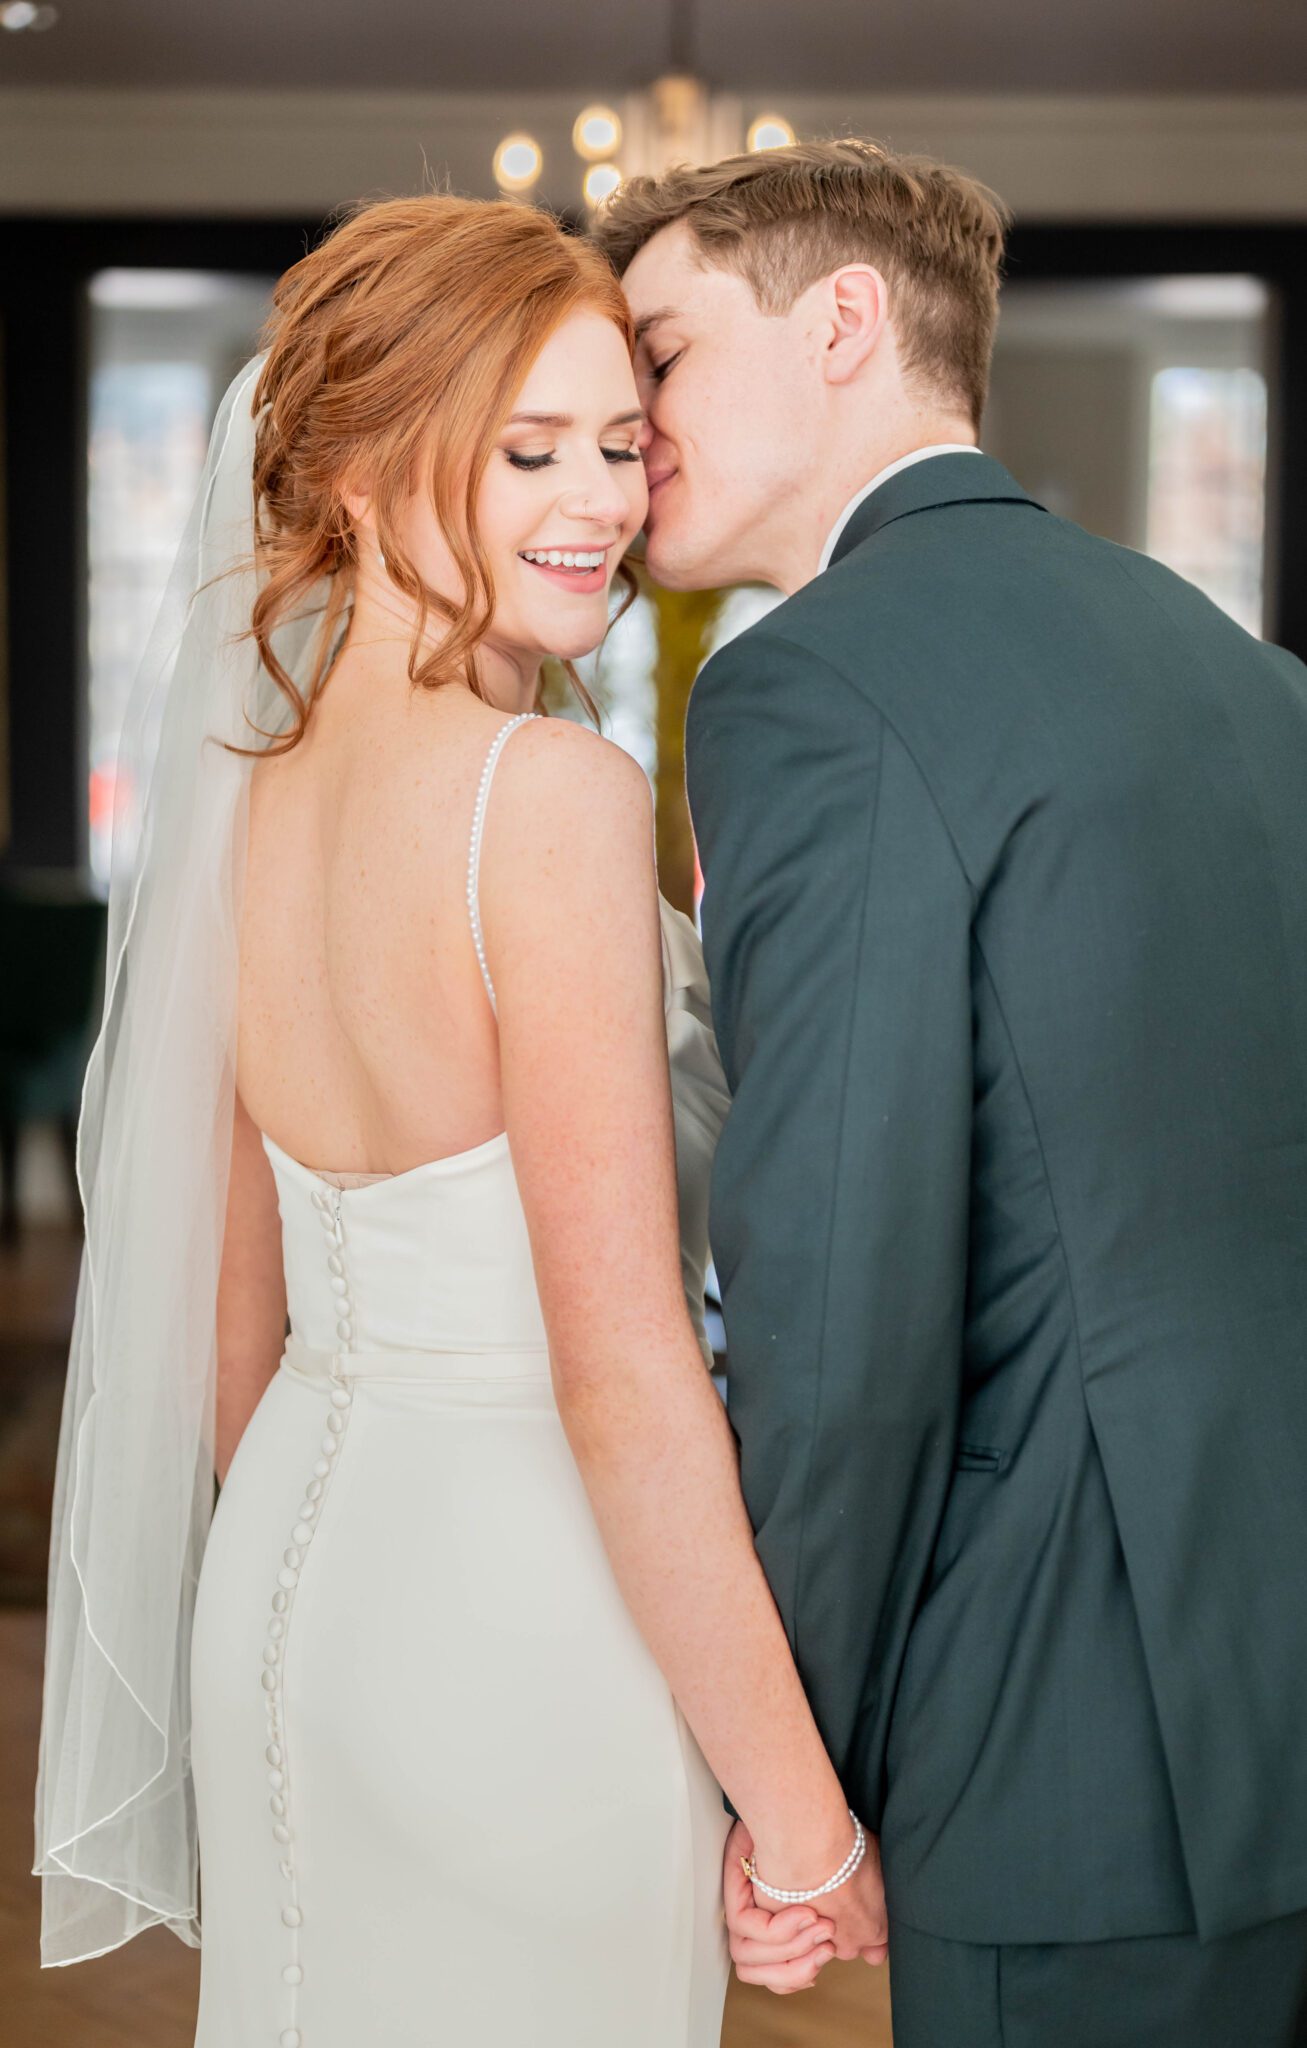 Couple portrait of groom leaning into bride, showing the back of bride's classic gown with button detailing, classic Calgary wedding inspiration.